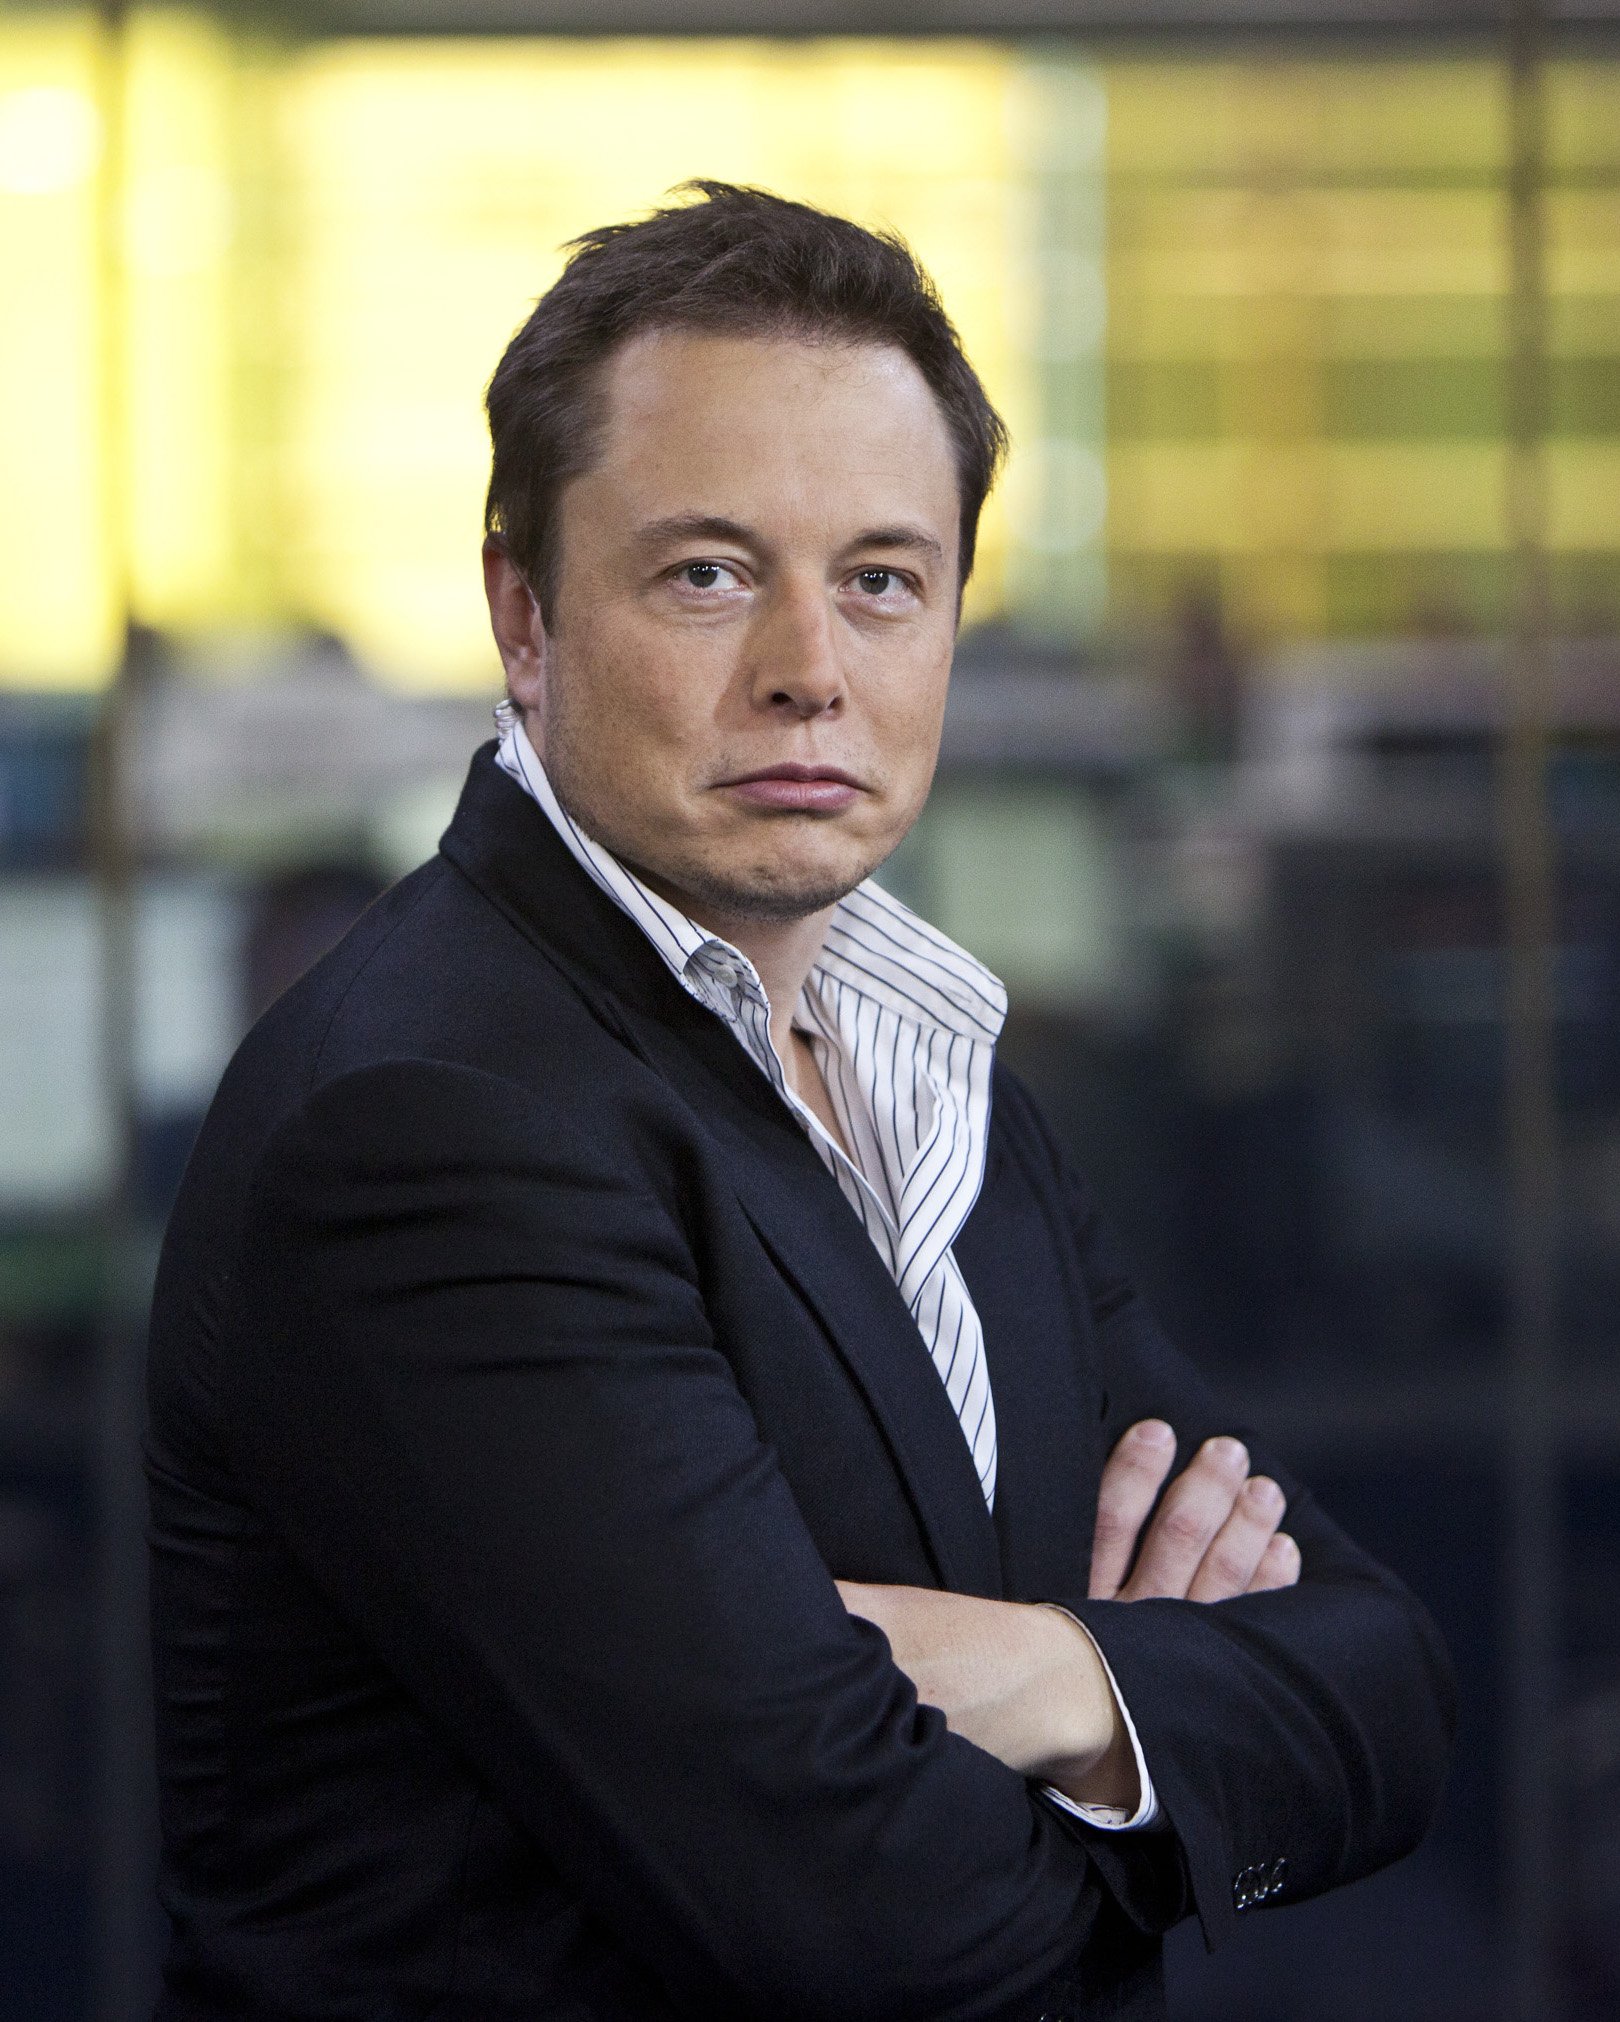 Elon Musk, co-founder and chief executive officer of Tesla Motors Inc., poses for a photograph during a break in a Bloomberg Television interview in New York, U.S., on Friday, Sept. 21, 2012. | Source: Getty Images